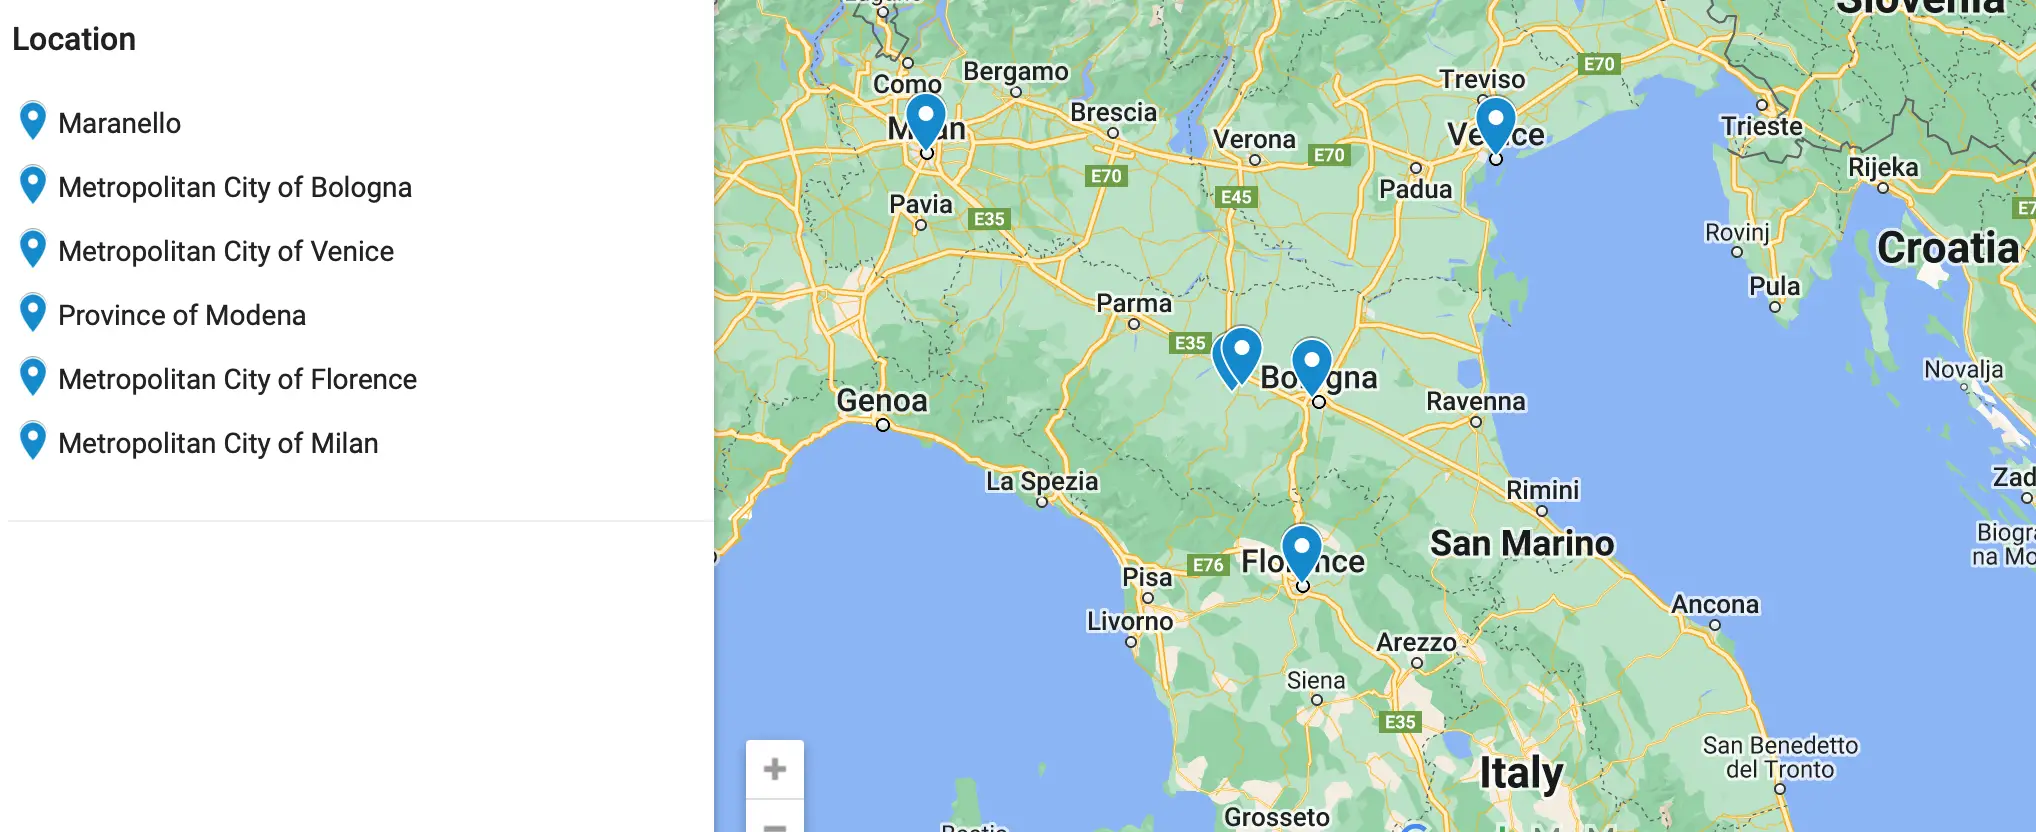 Map of Maranello Italy in relation to other cities and towns in Northern Italy